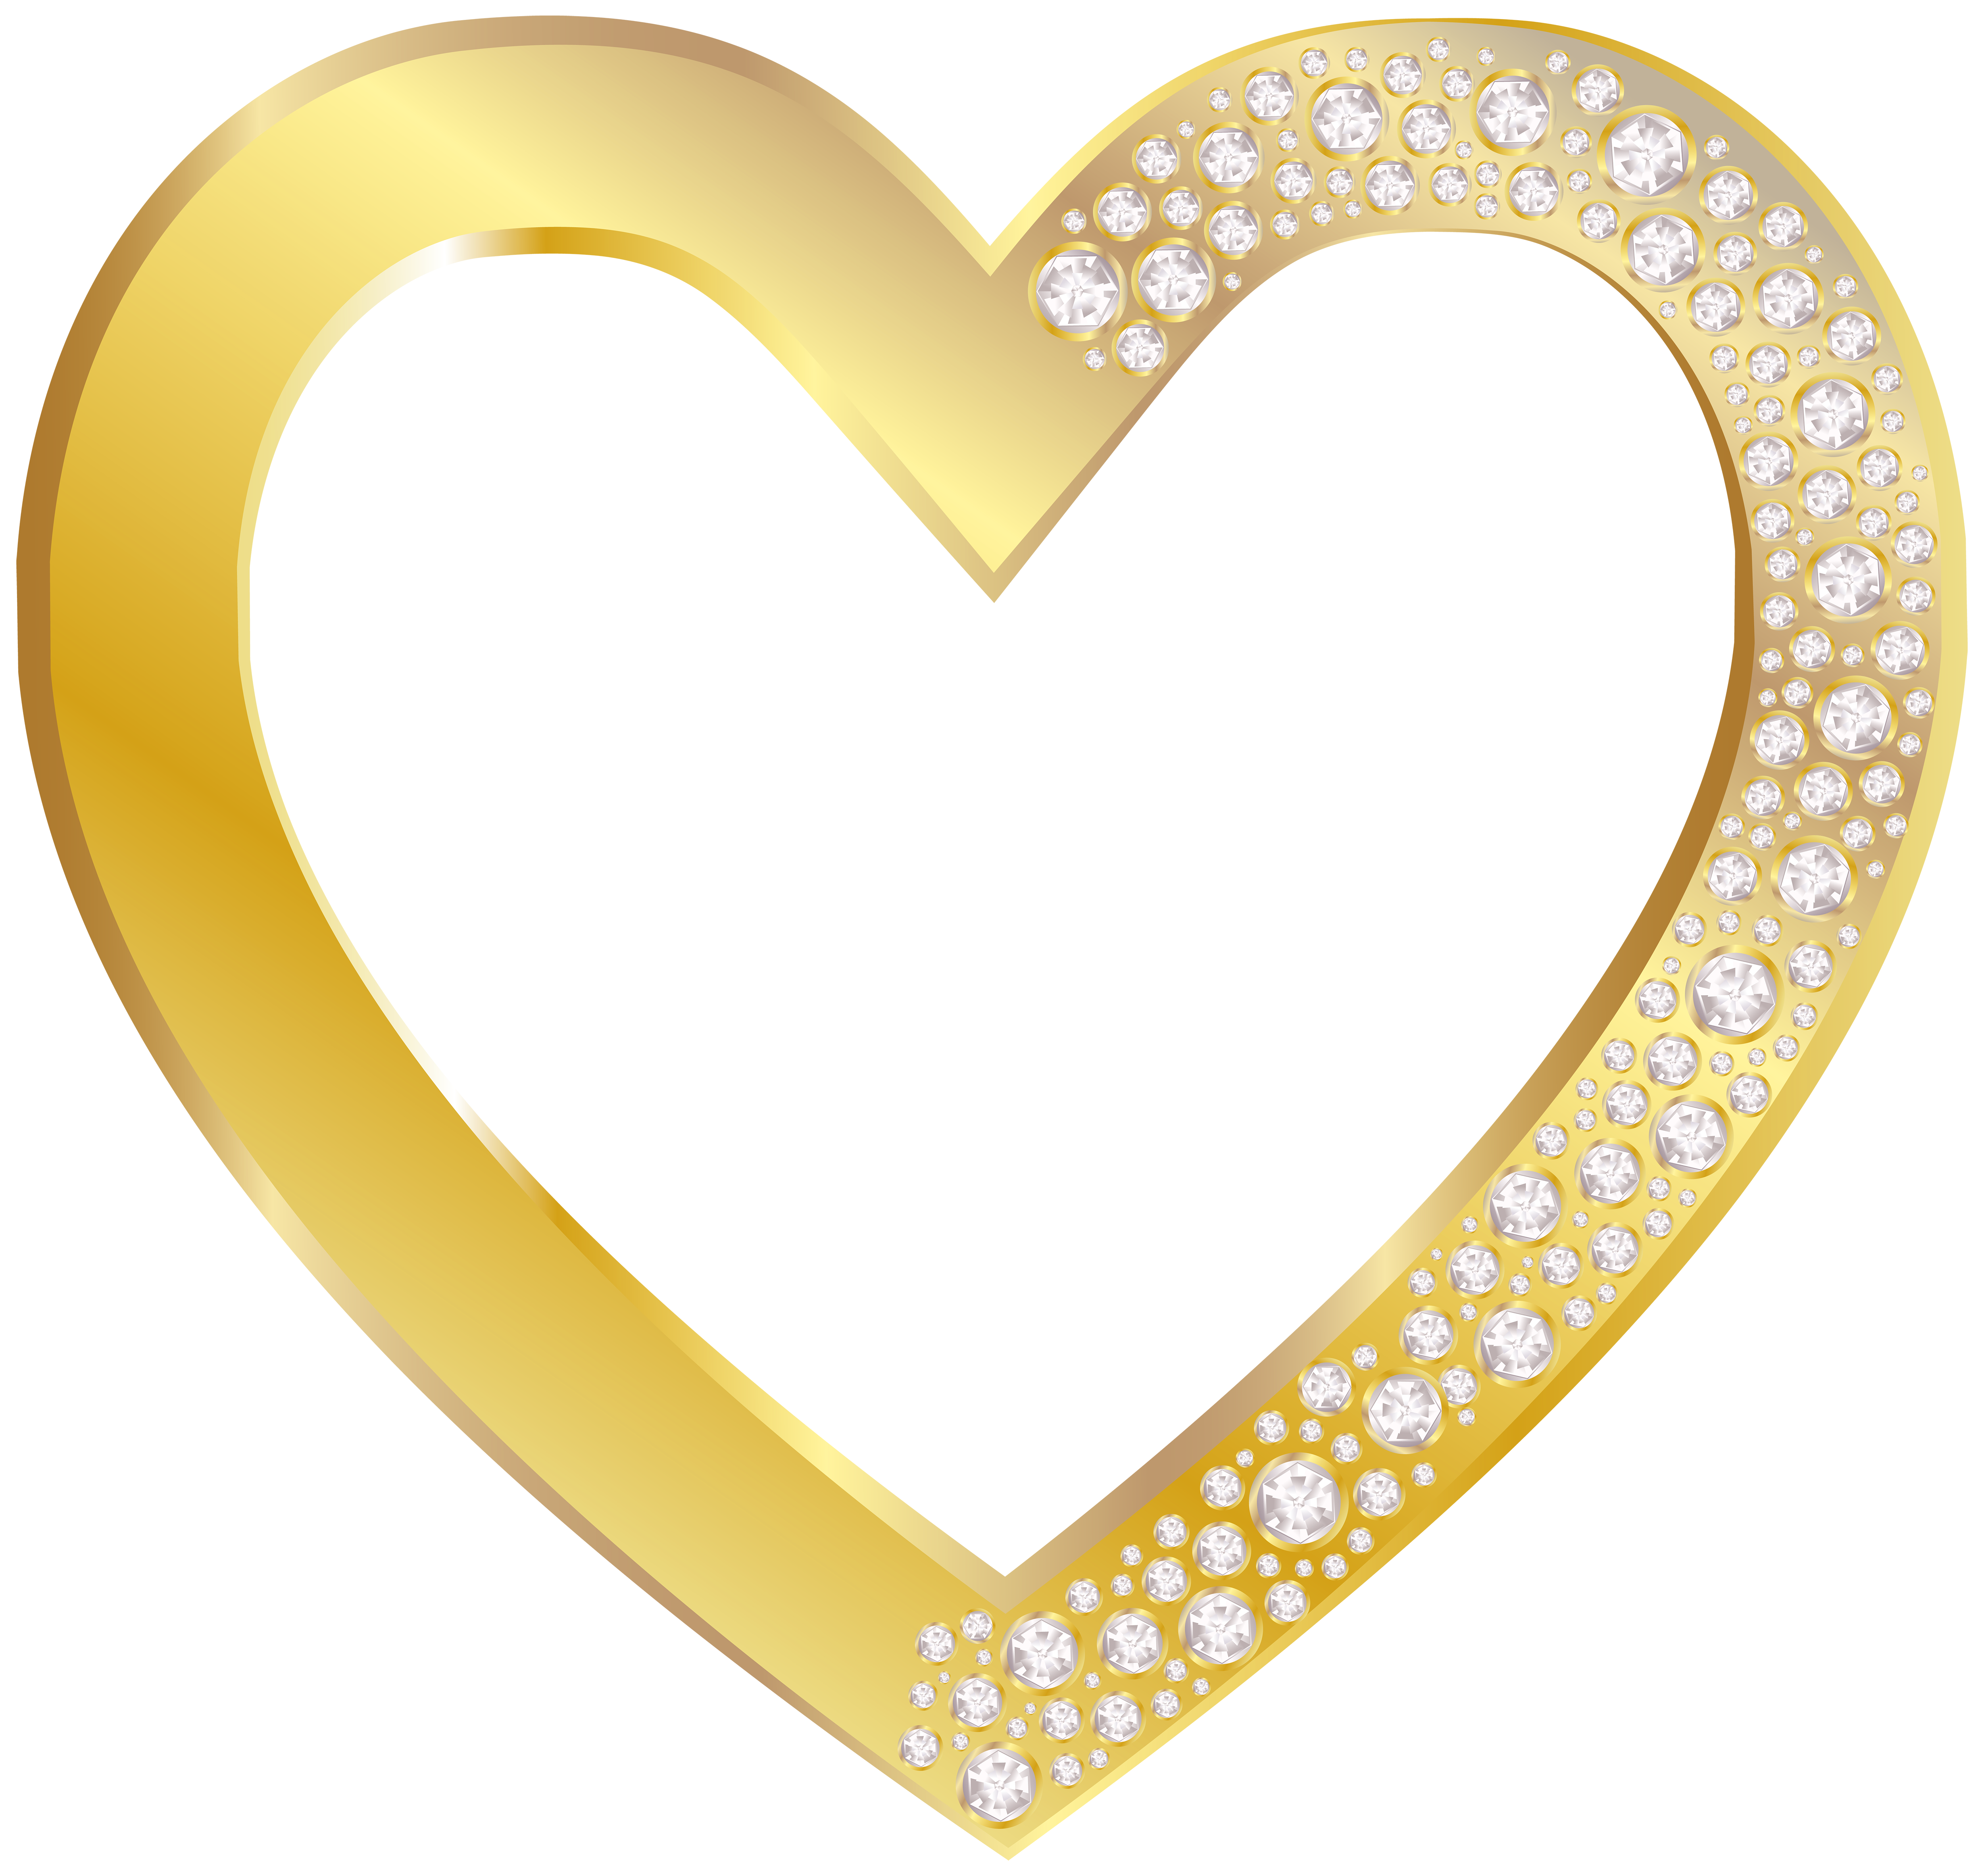 Gold Heart with Diamonds PNG Clip Art Image